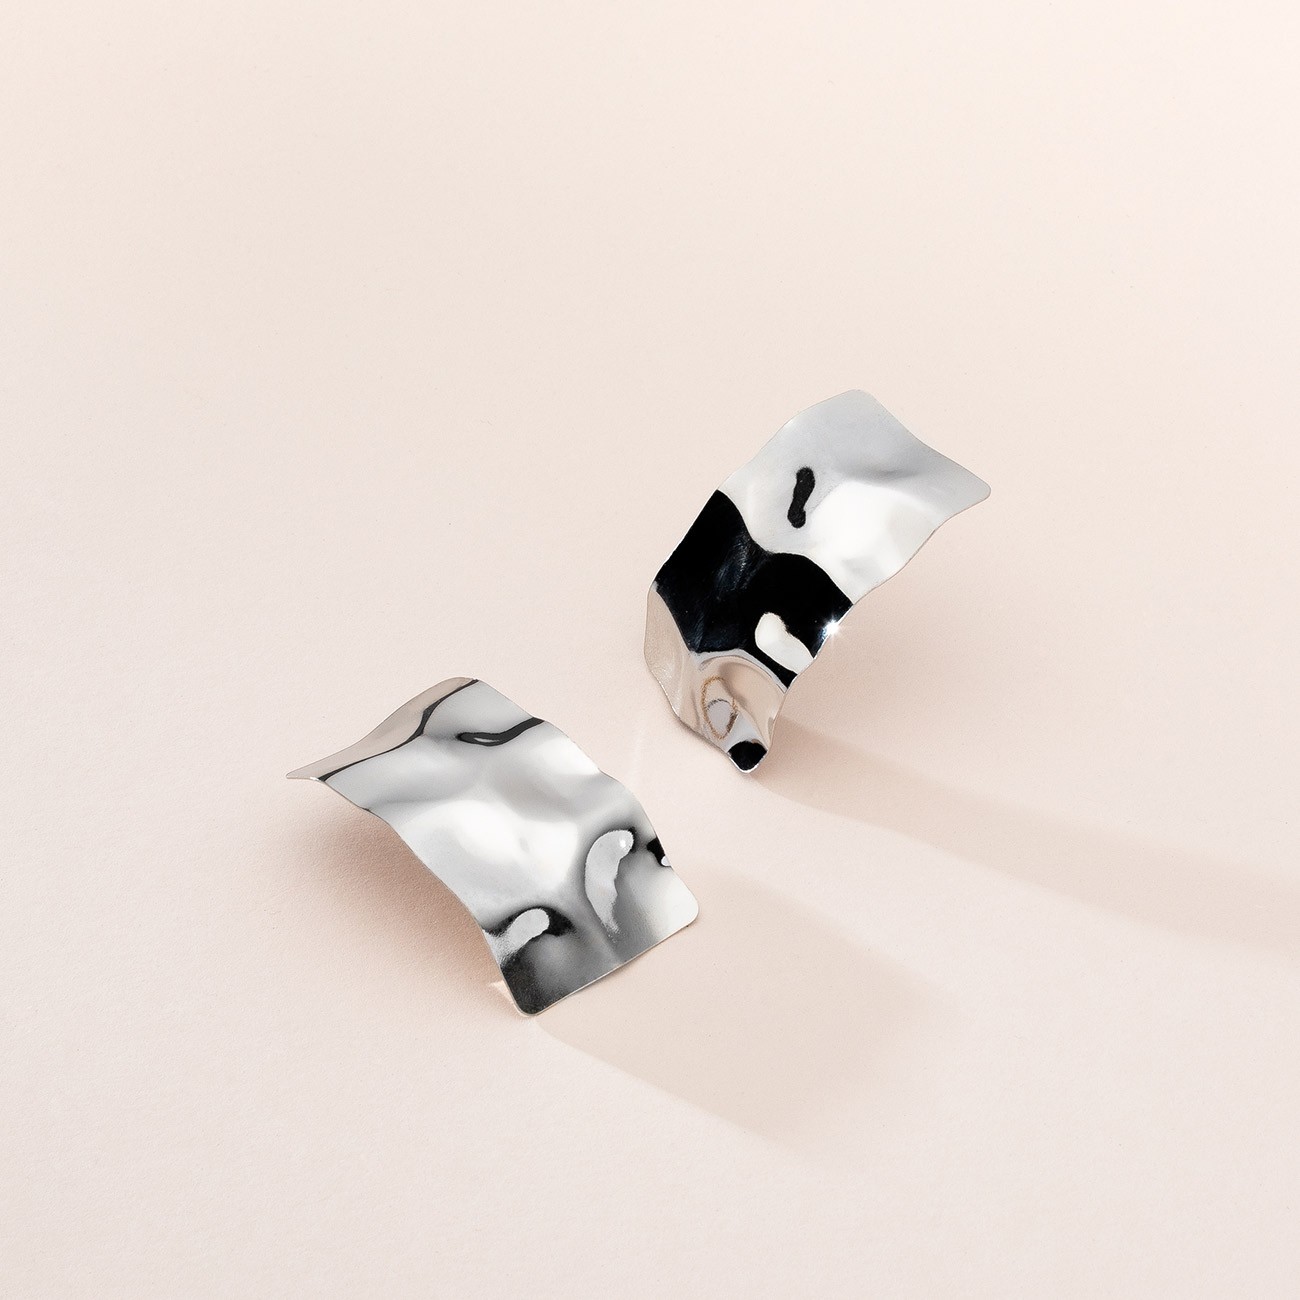 Simple rectangle earrings, sterling silver 925, XENIA x GIORRE